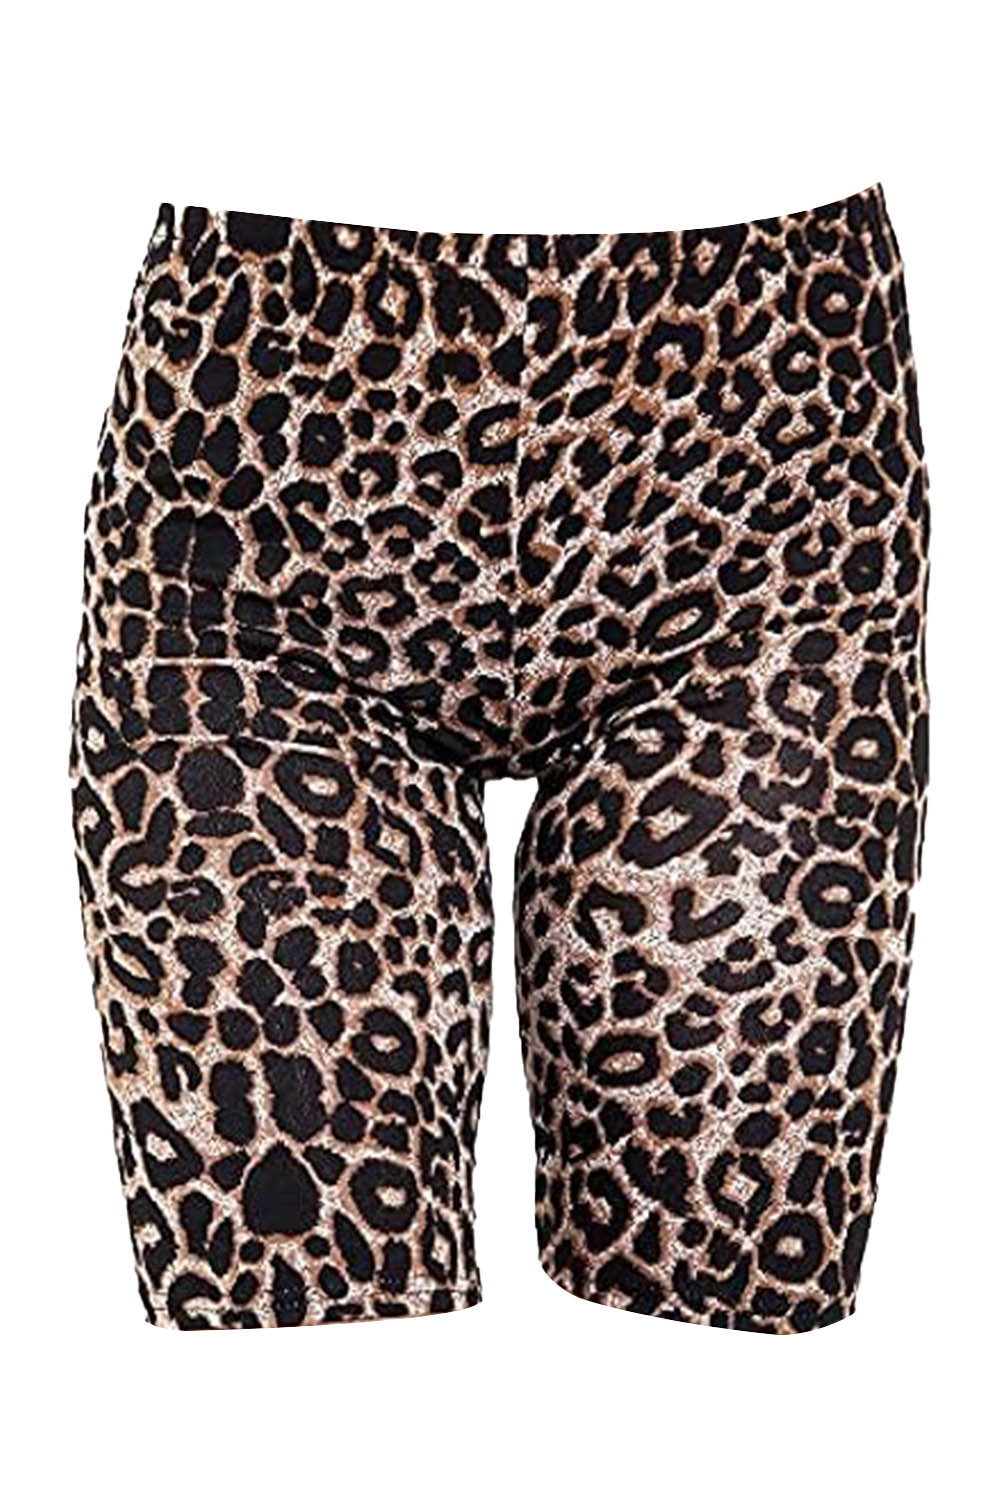 Crazy Chick Adult Leopard Print Cycling Shorts